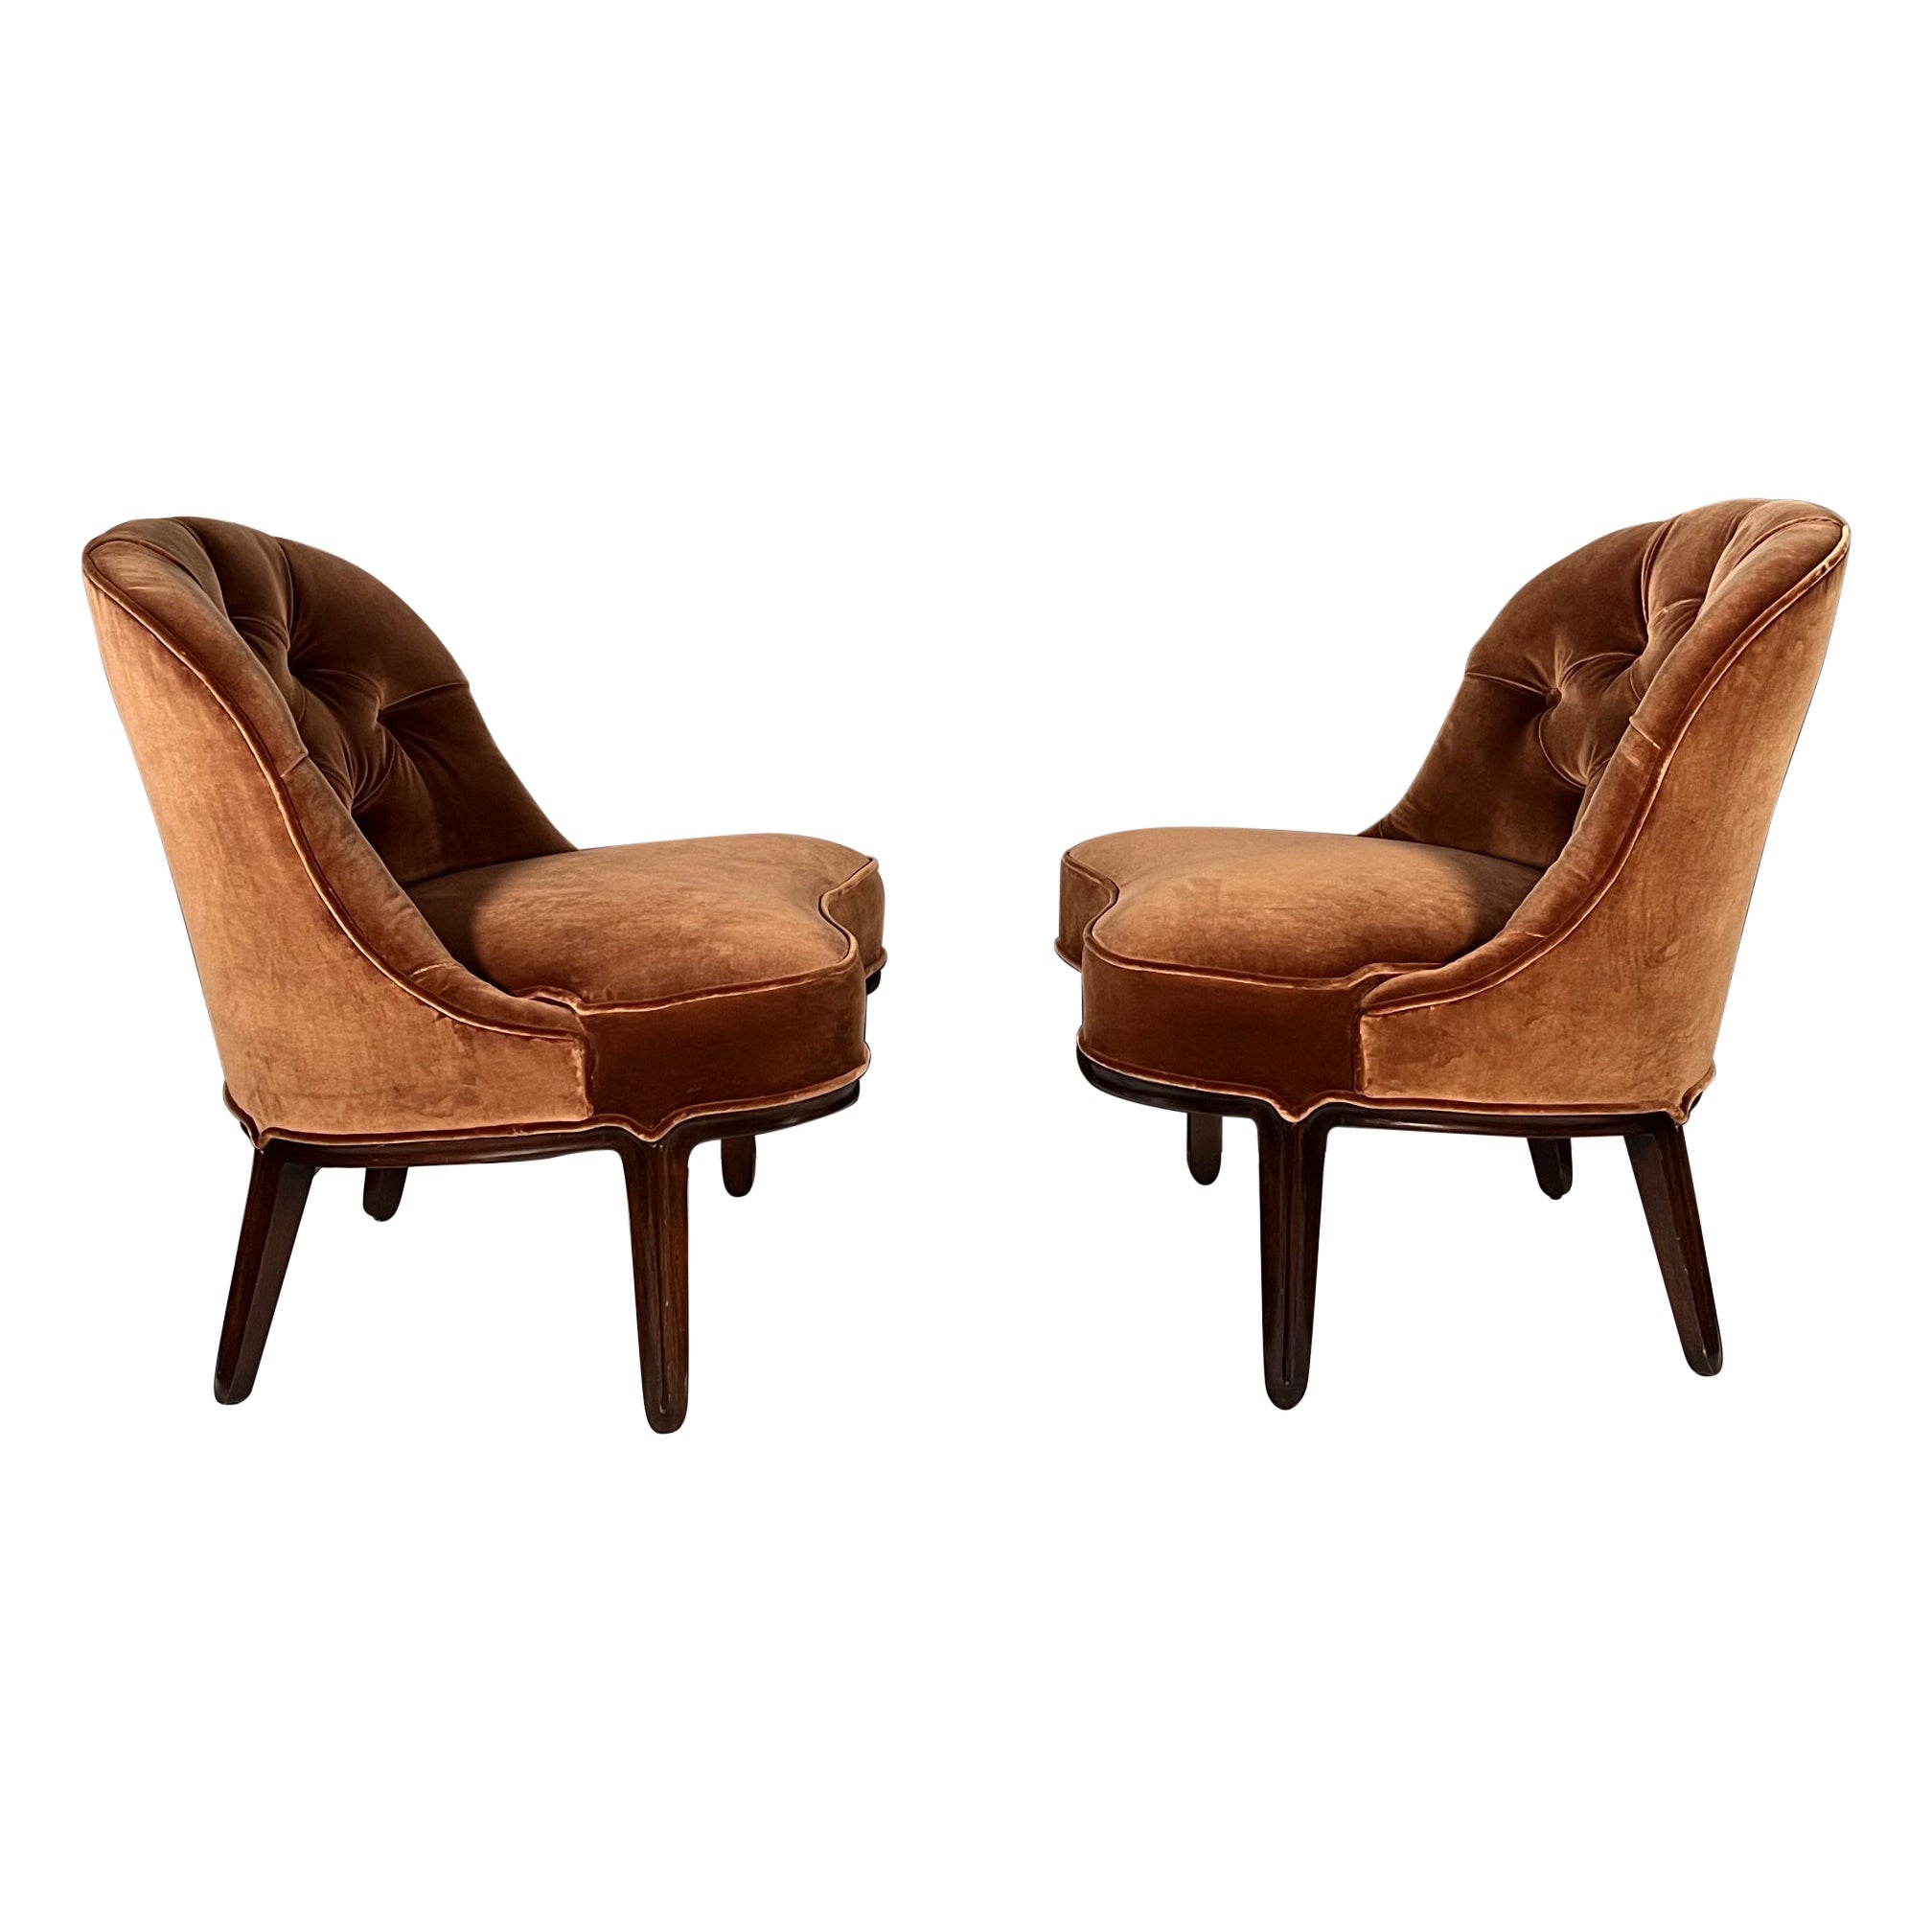 Slipper Chairs by Edward Wormley for Dunbar Janus Collection